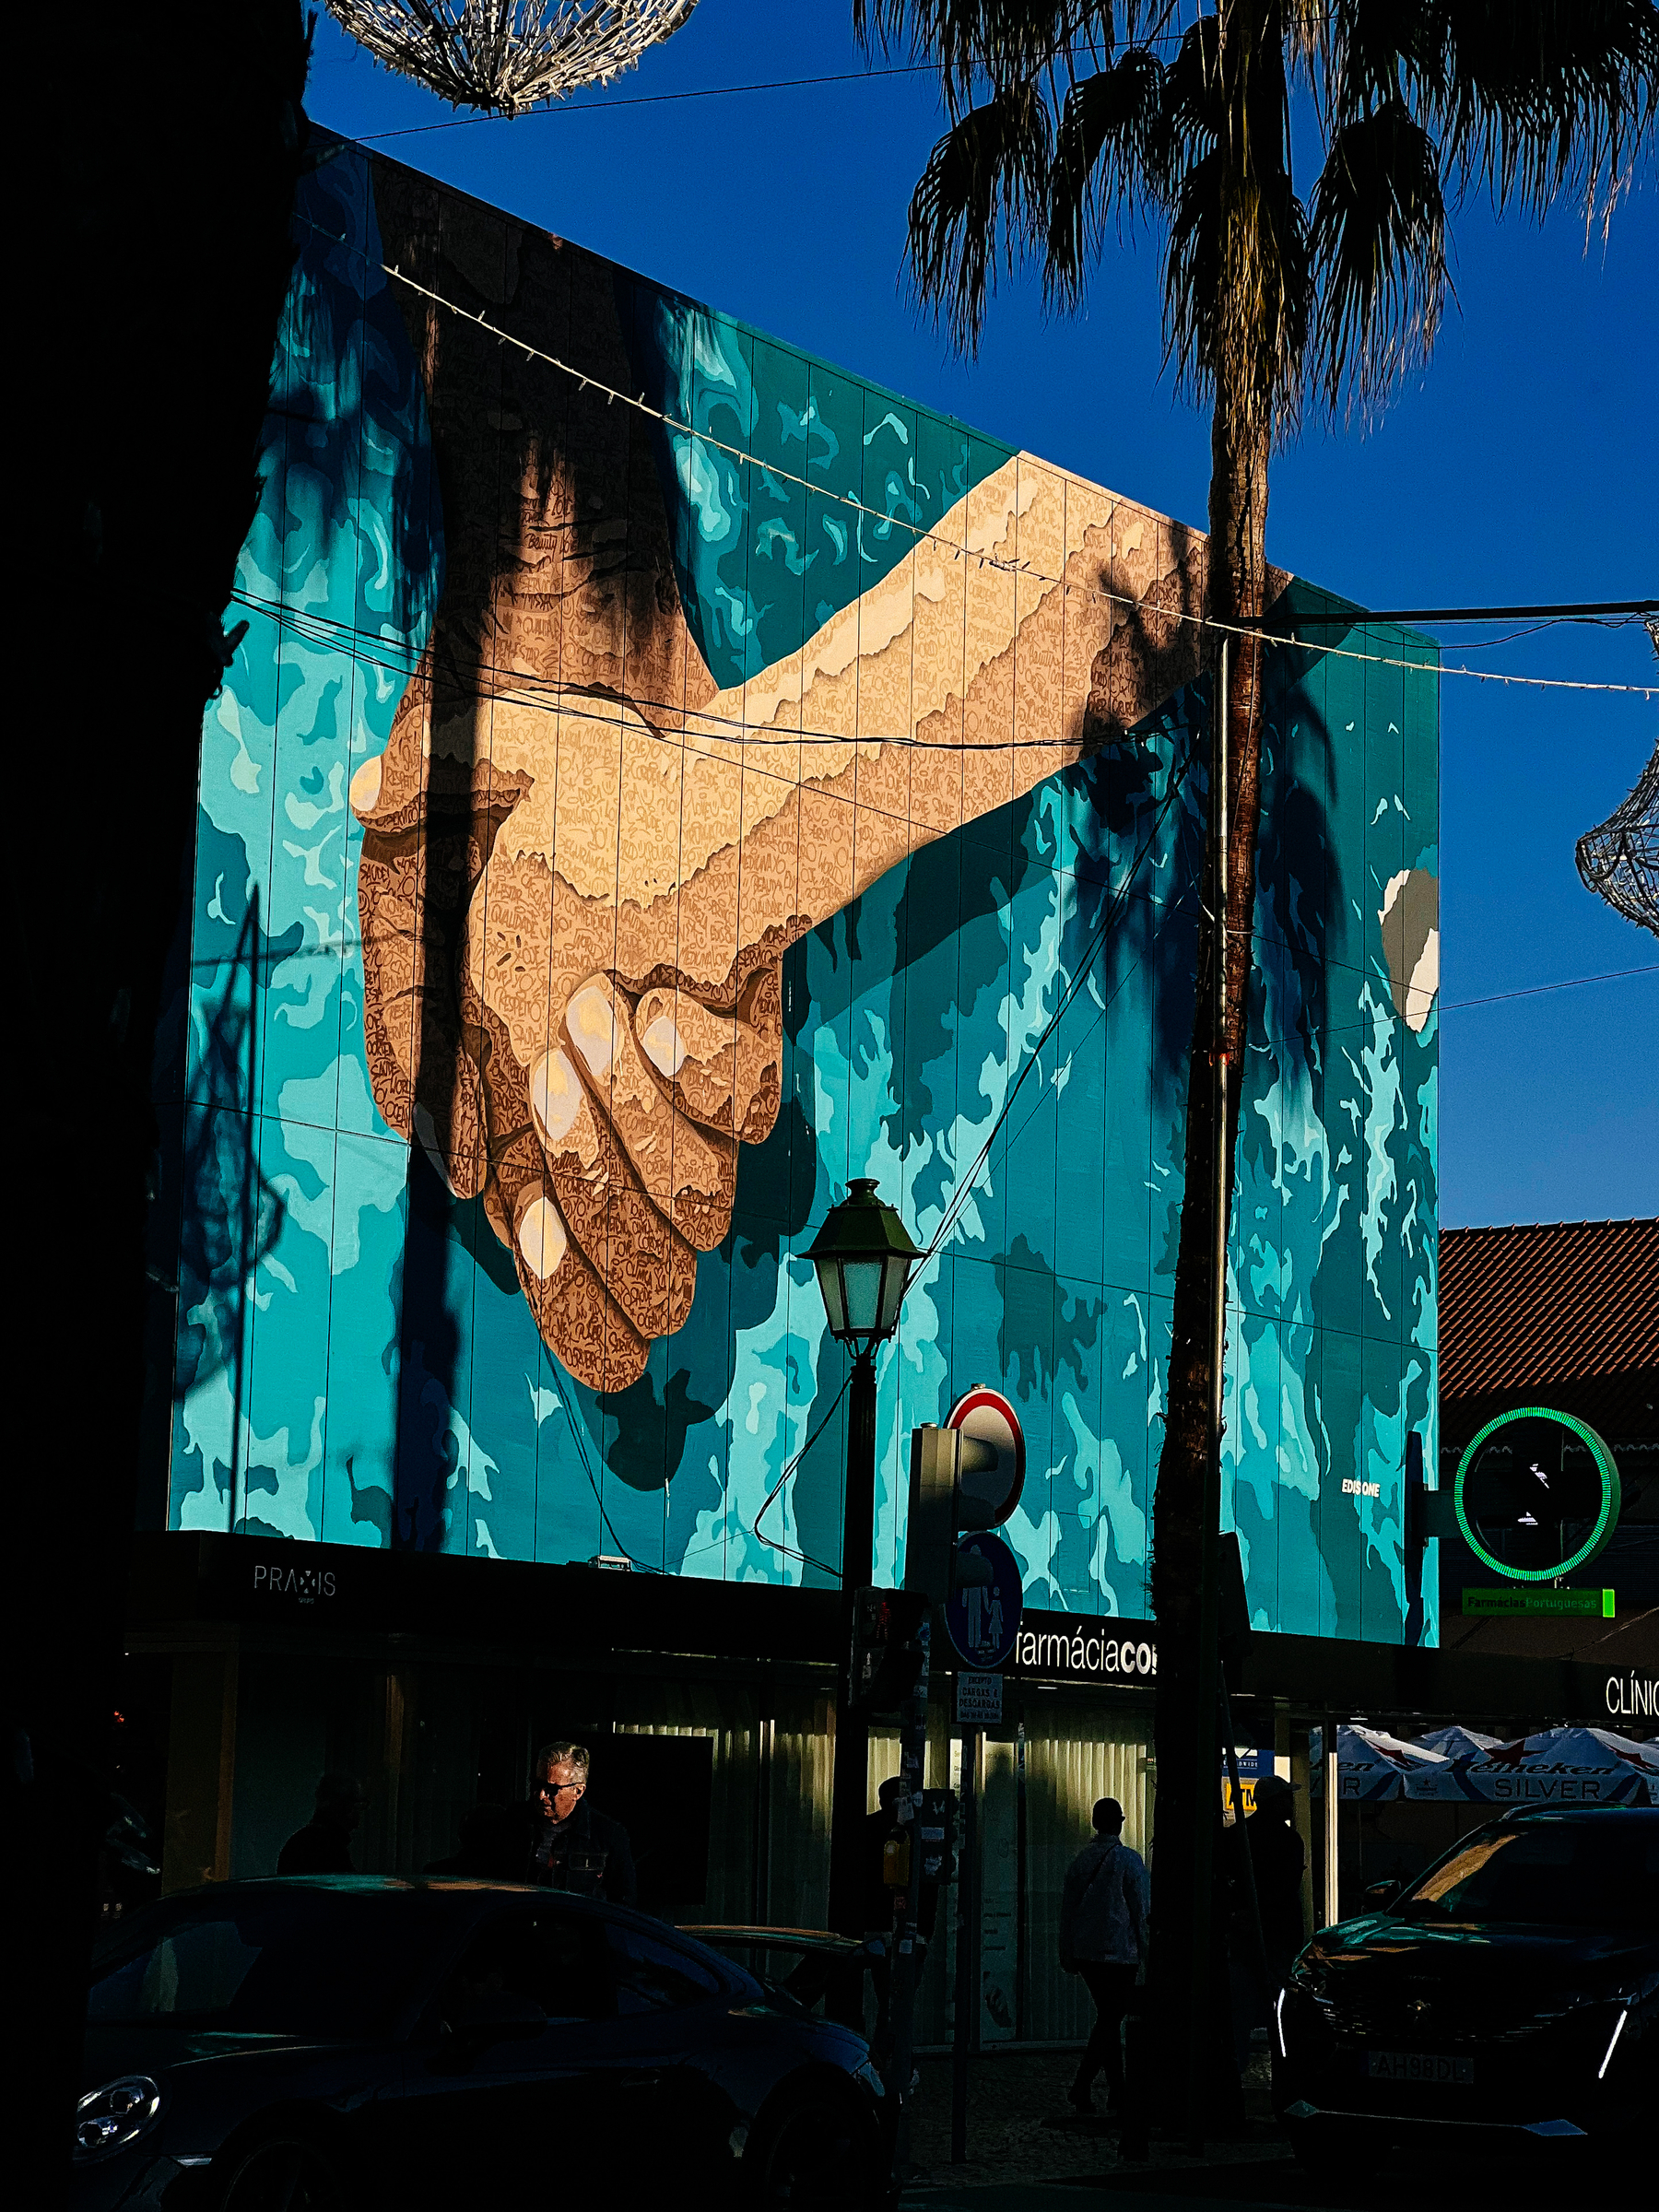 A mural on a building featuring a large hand holding a smaller hand, amid abstract blue patterns. In the foreground, shadowy figures of people, cars, a streetlight, and palm trees against a bright sky.